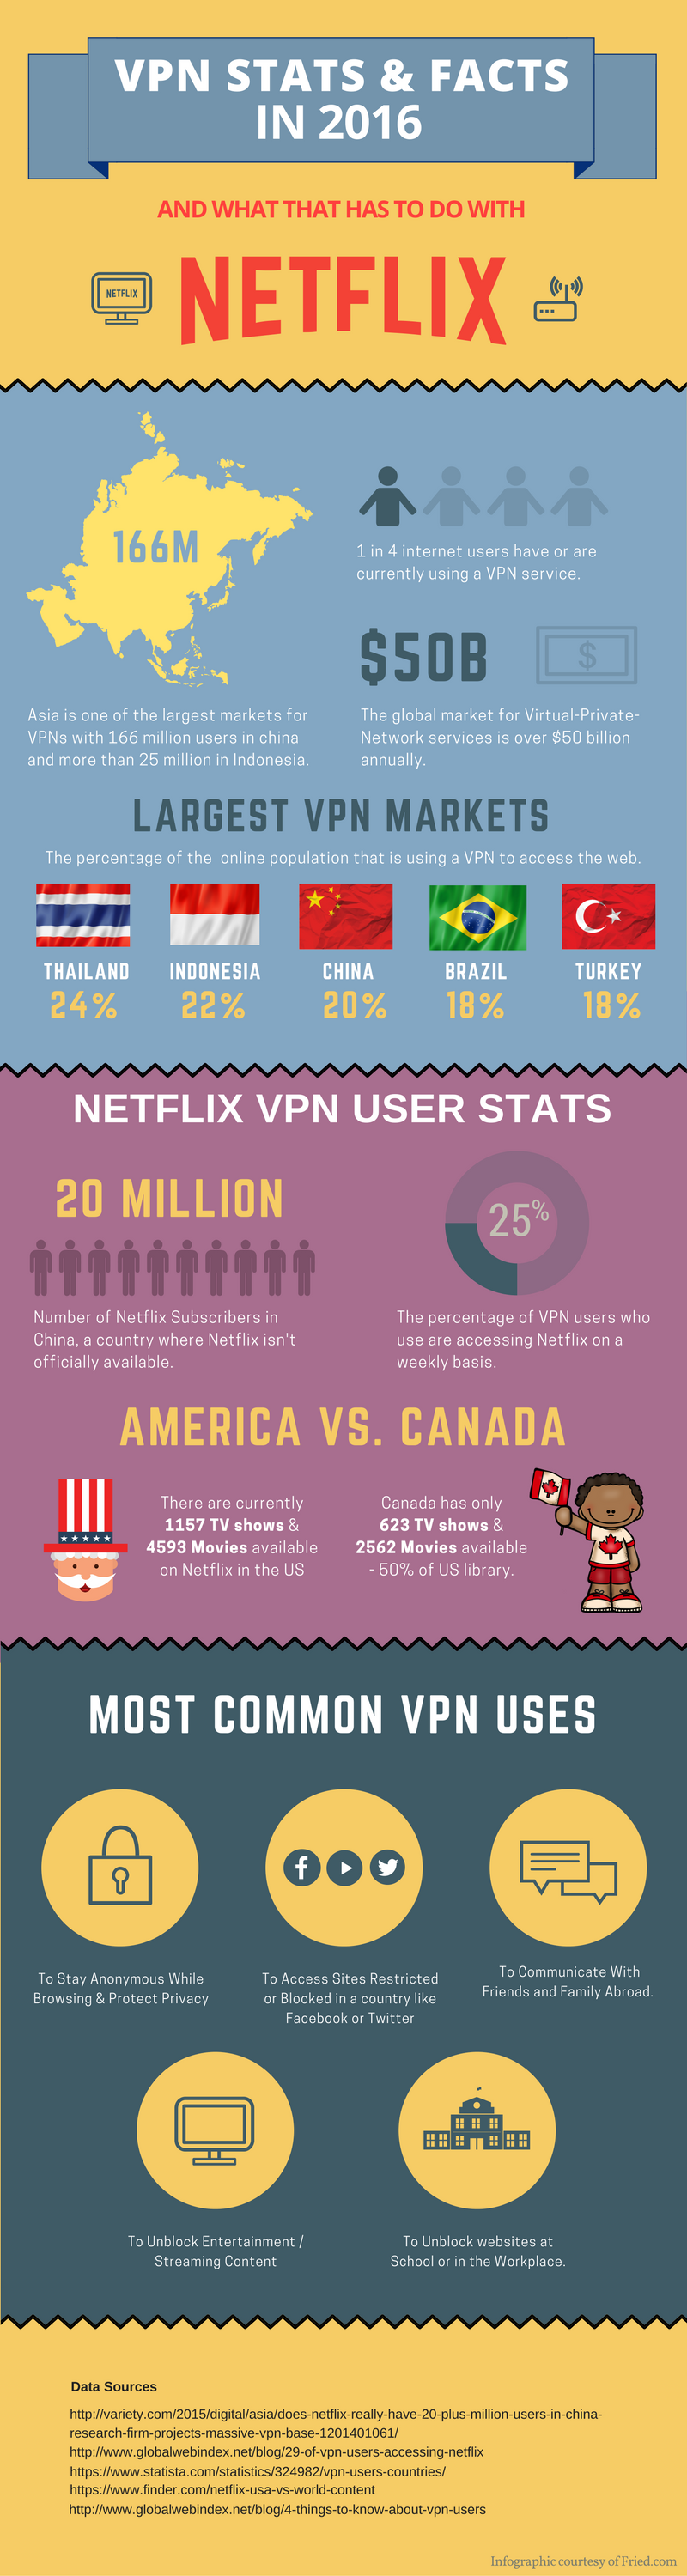 vpn-stats-and-fact-in-2016